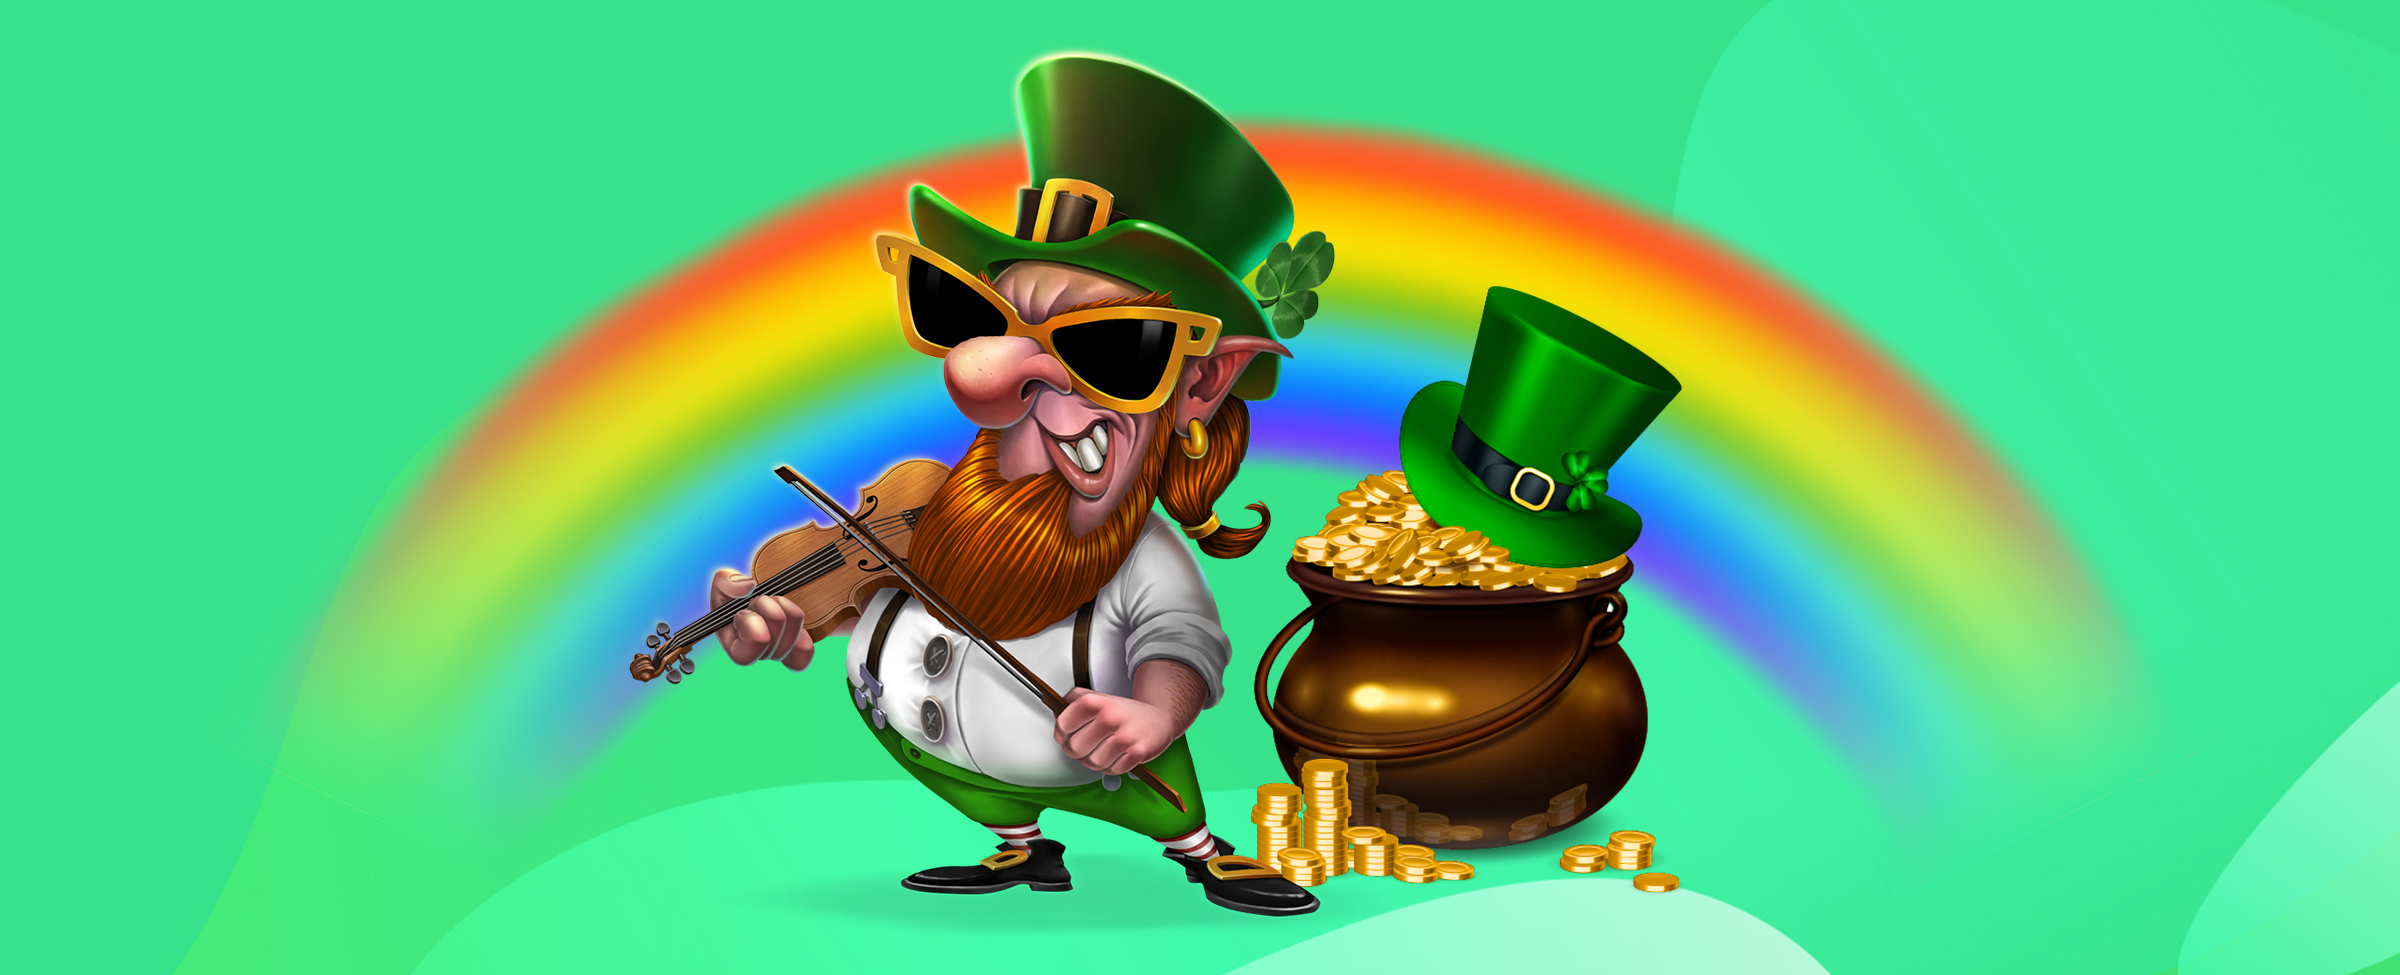 The central character, a leprechaun, from the SlotsLV slot game, Larry's Lucky Tavern, is seen wearing green overalls and hat, playing a fiddle and standing next to a pot of gold with a green hat sitting on top. Behind him is a rainbow, set against a green background.